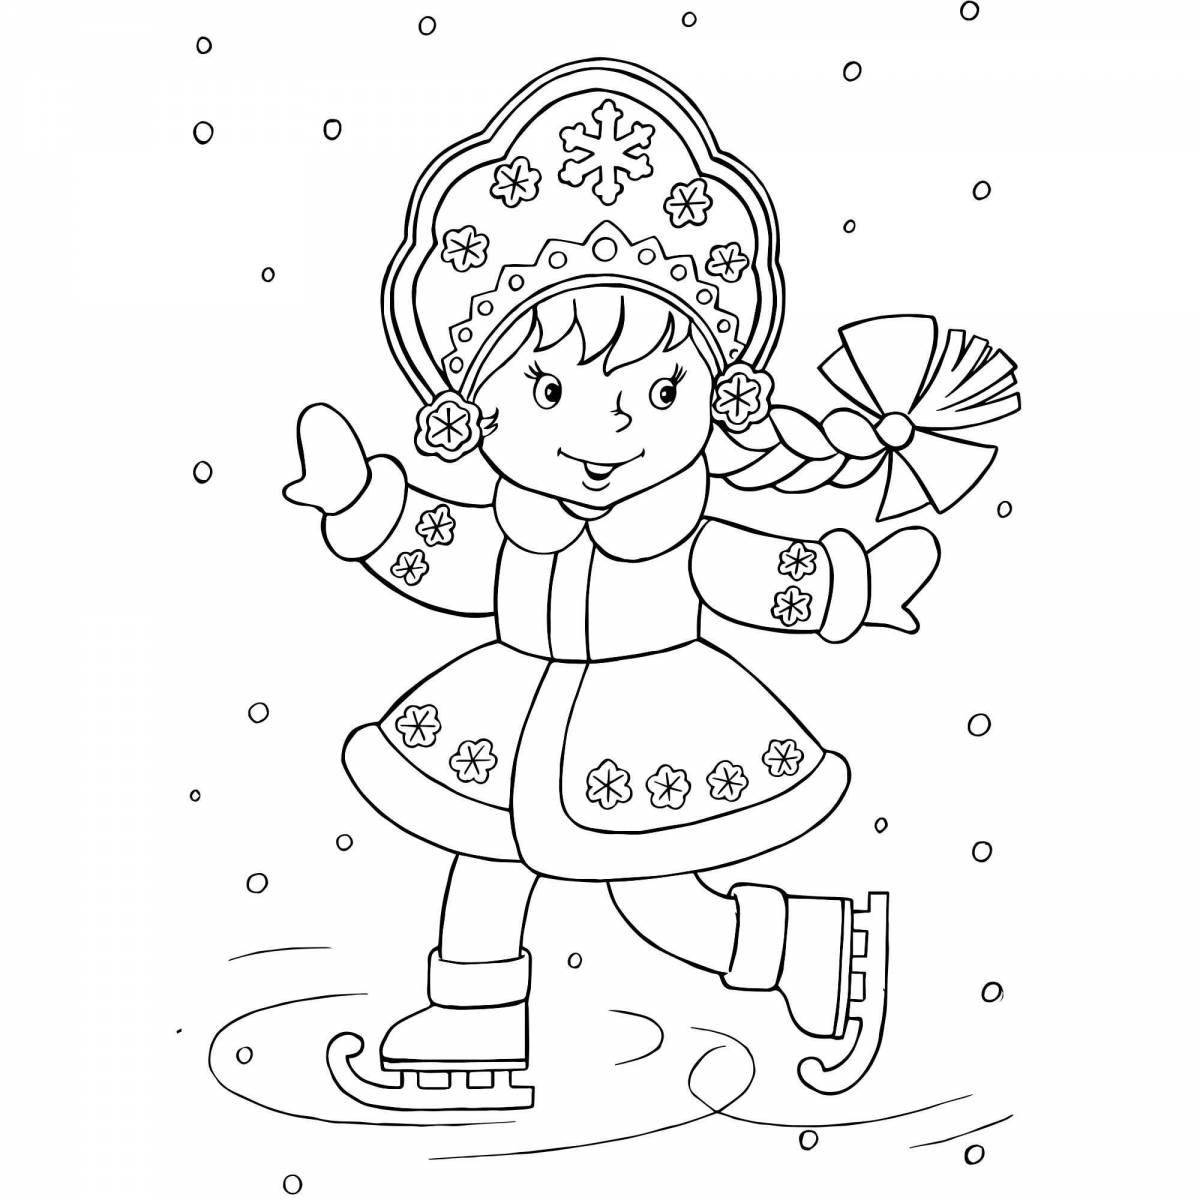 Coloring book glowing face of snow maiden